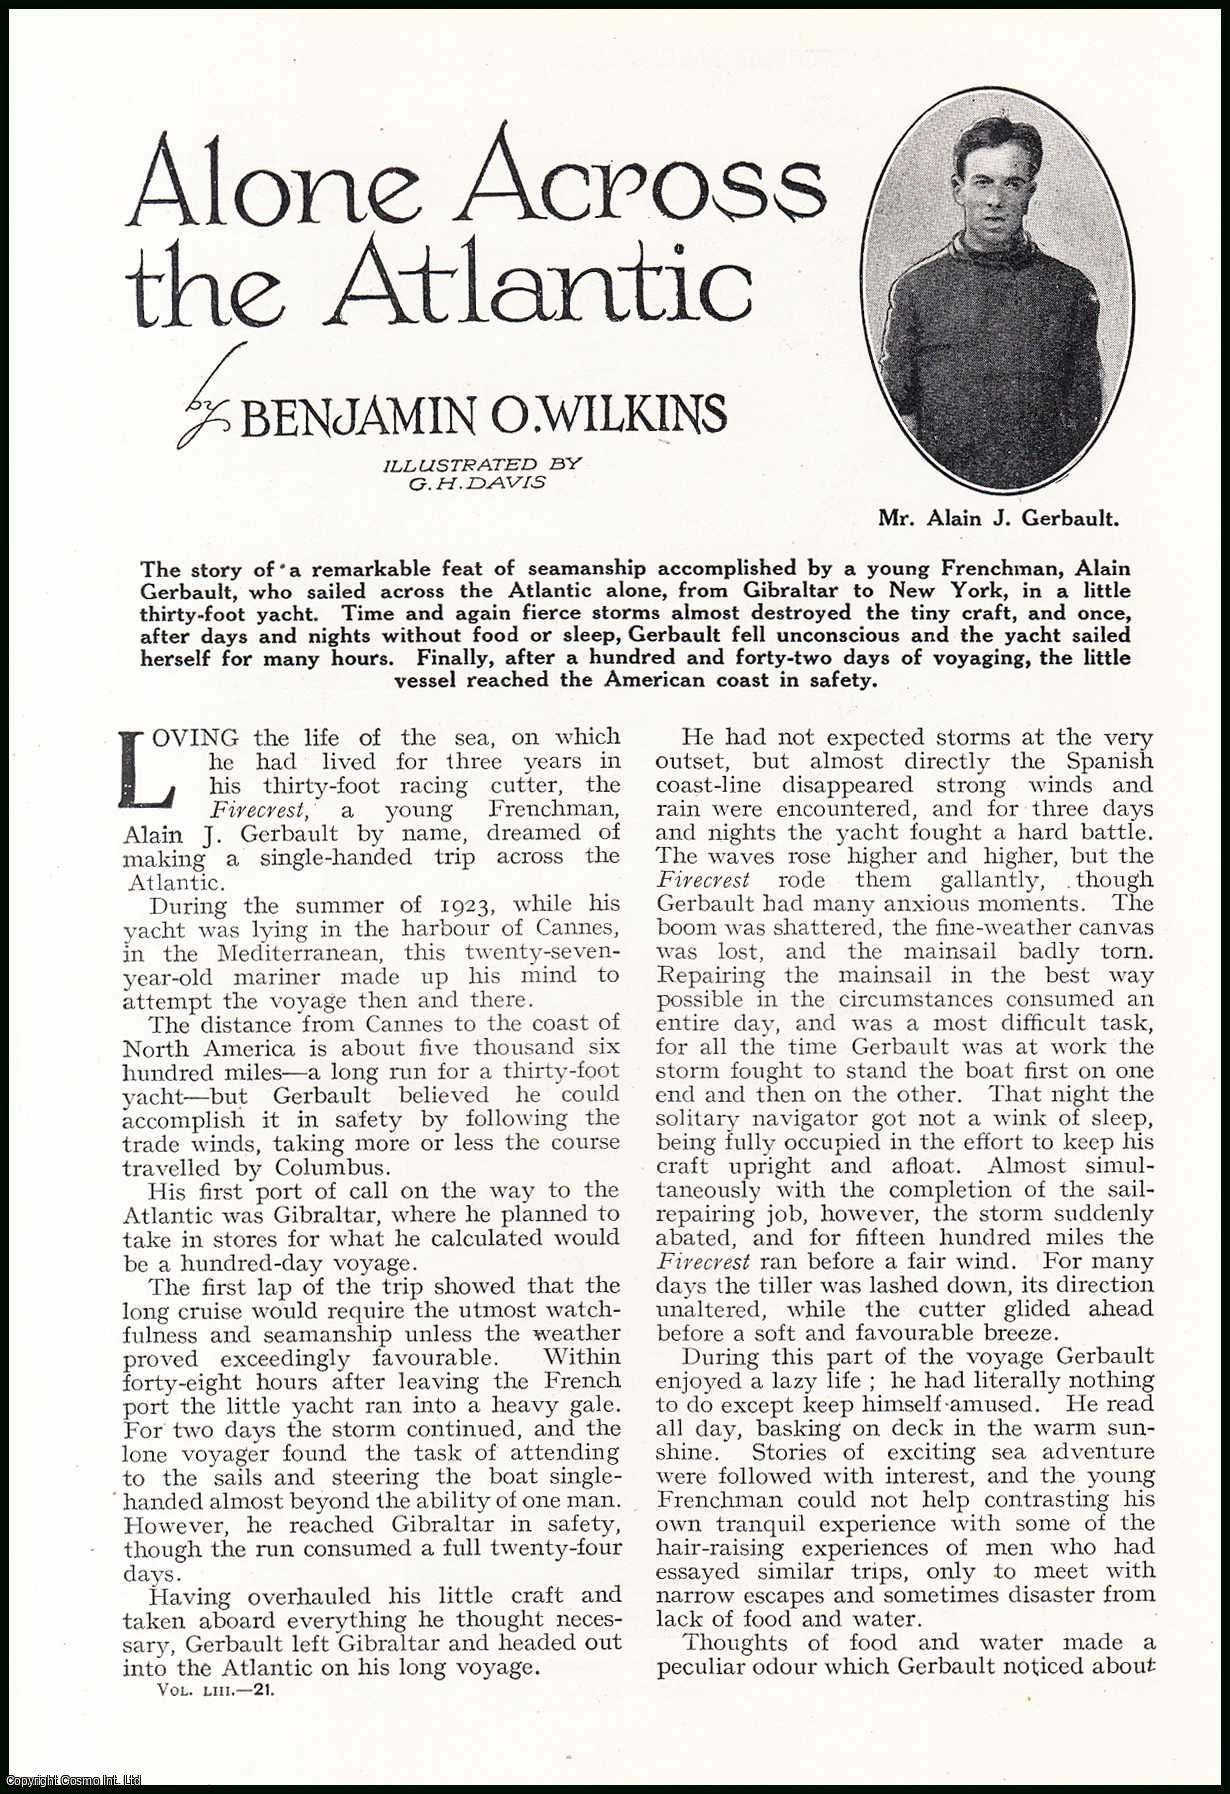 Benjamin O. Wilkins. Illustrated by G.H. Davis. - Alone Across the Atlantic, From Gibraltar to New York : a French seamanship, Mr. Alain J. Gerbault in a thirty-foot yacht. An uncommon original article from the Wide World Magazine, 1924.